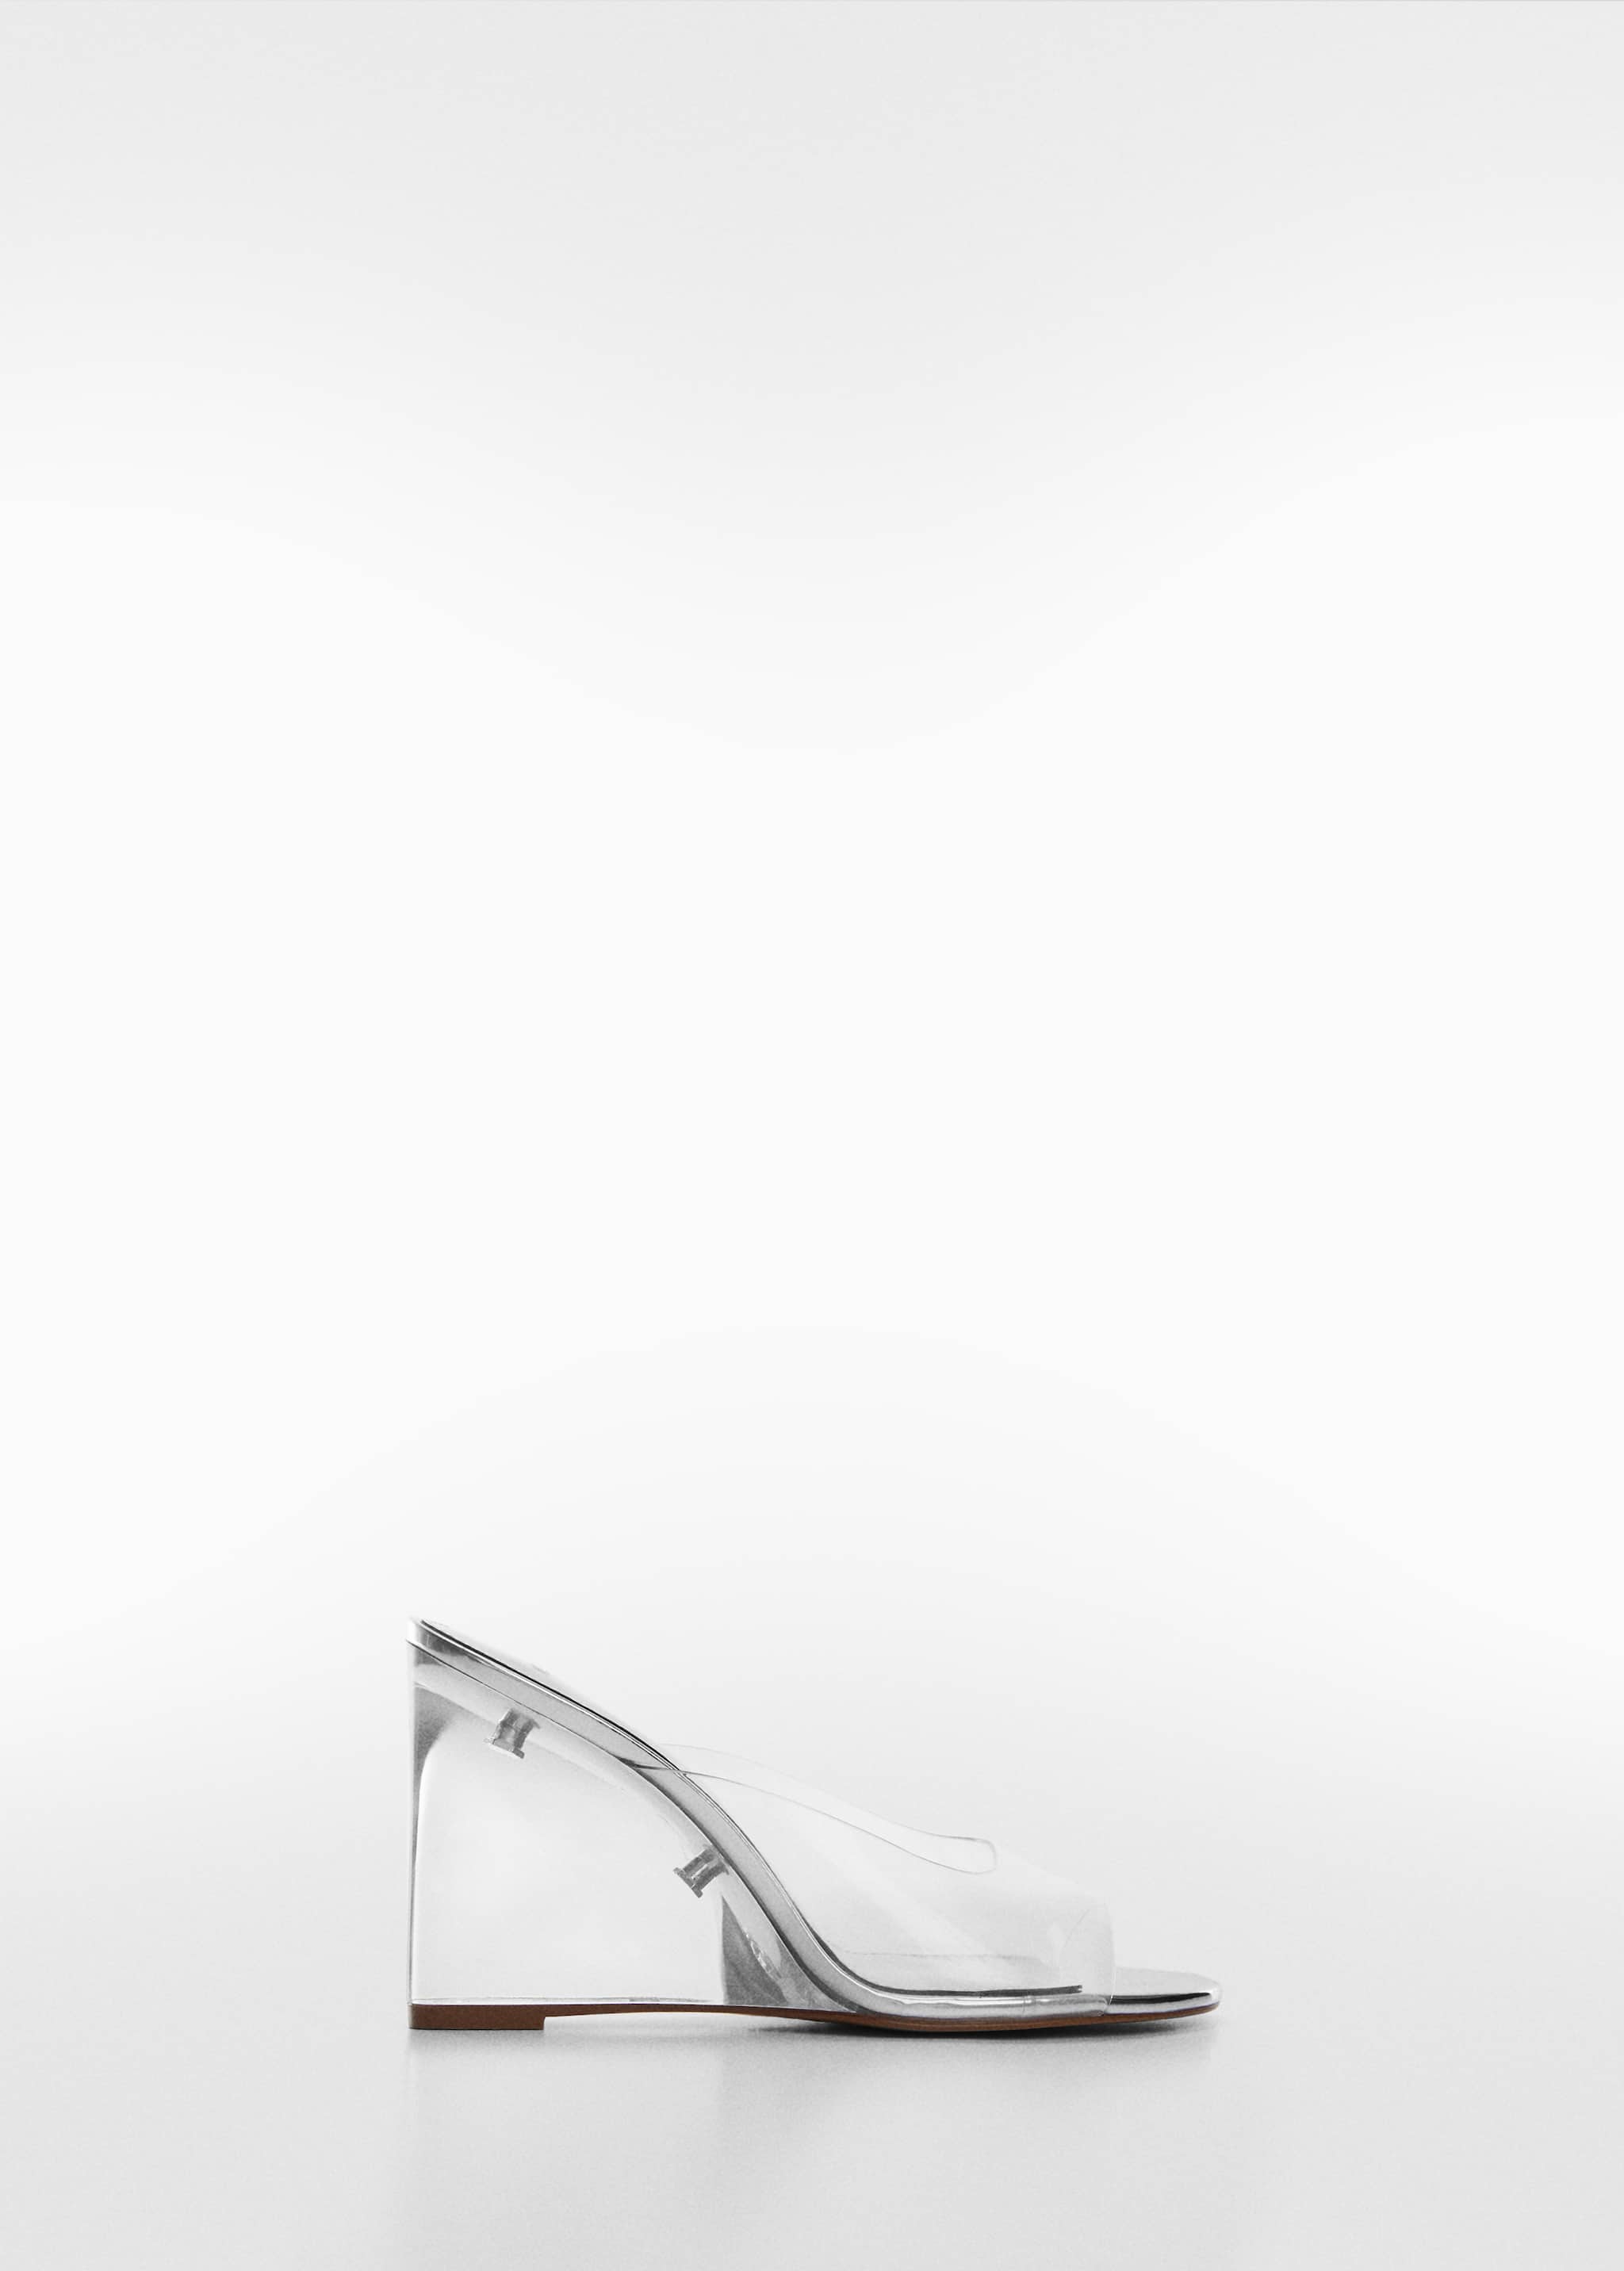 Transparent vinyl wedge sandals - Article without model